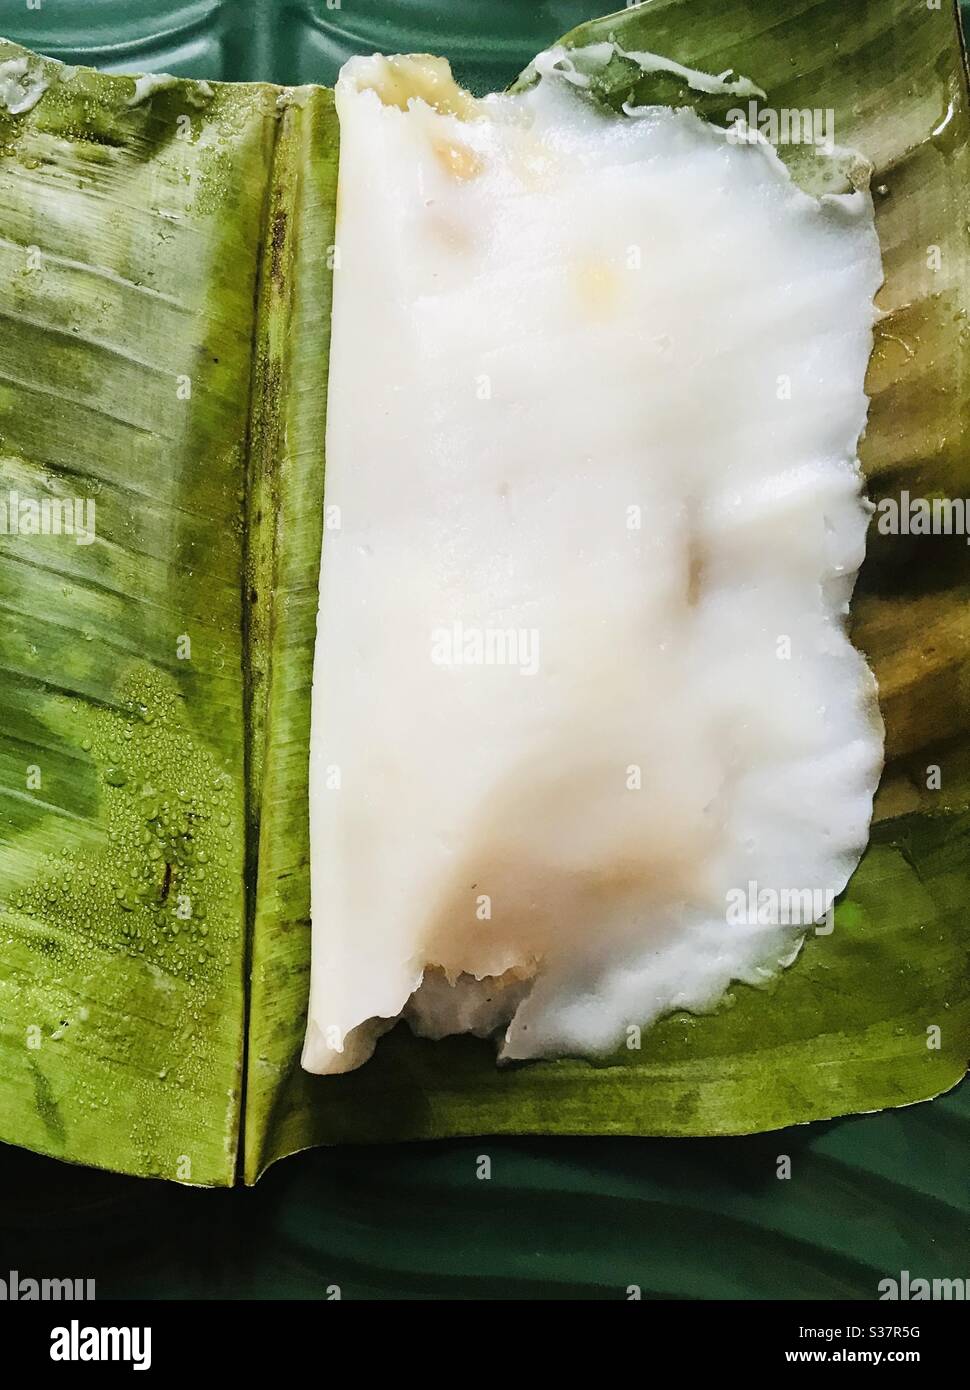 Home made Ela ada aka banana leaf pan cake - traditional kerala delicacy , dough made of rice flour with banana coconut jaggery fillings & steamed- evening snack or breakfast Stock Photo